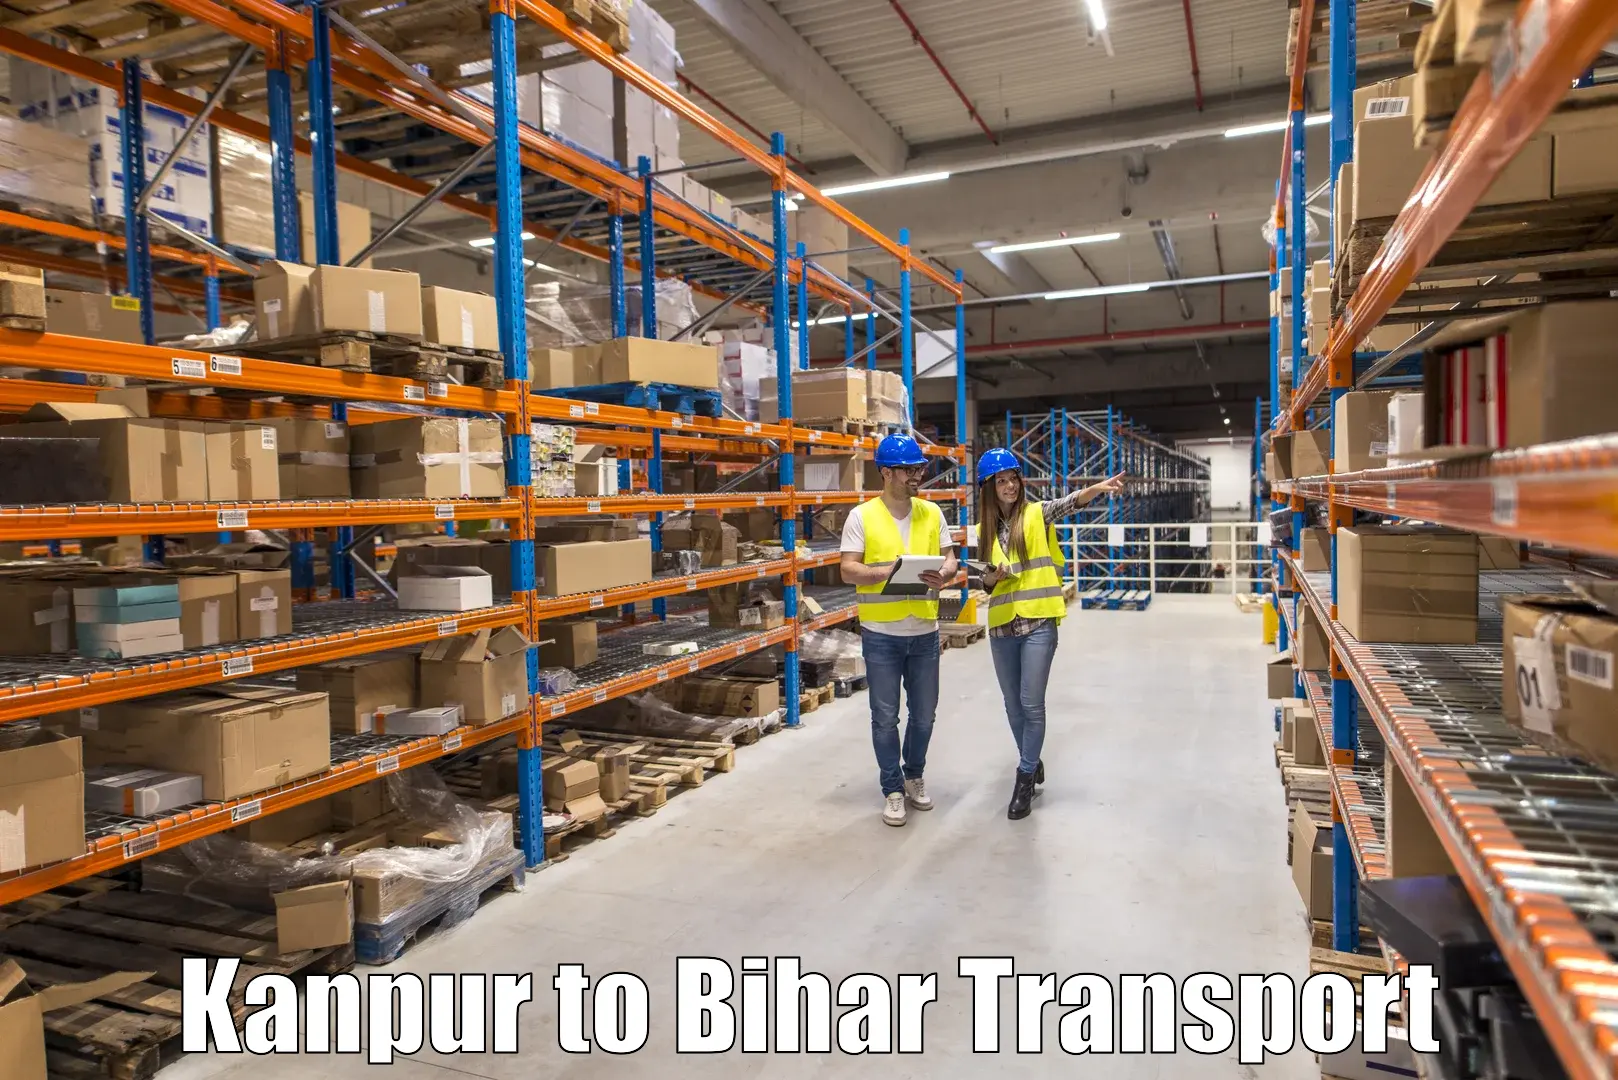 Road transport services Kanpur to Begusarai